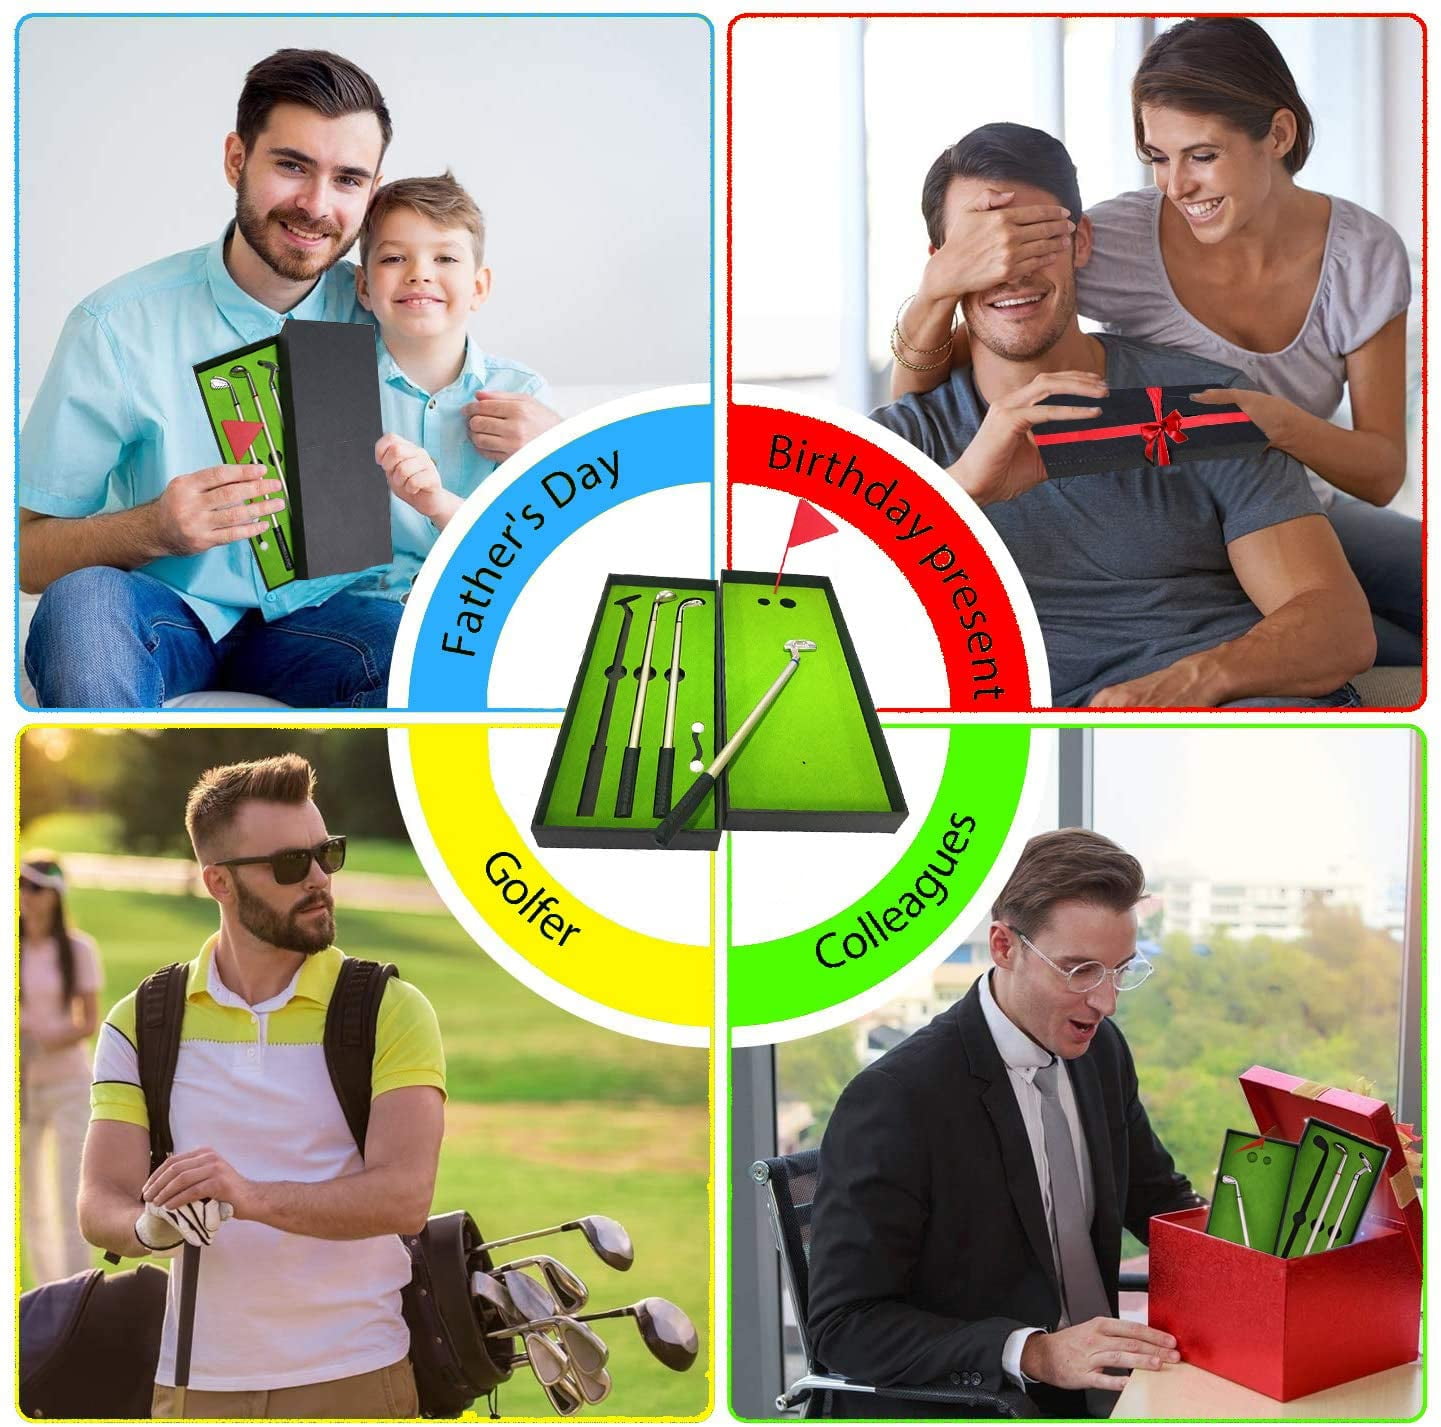 Golf Pen Gifts Cool Stuff Gadgets Things Unique Birthday Gifts for Men  Boyfriend Him Dad Adults Funny Random Gag Gifts Desk Toys Christmas  Stocking